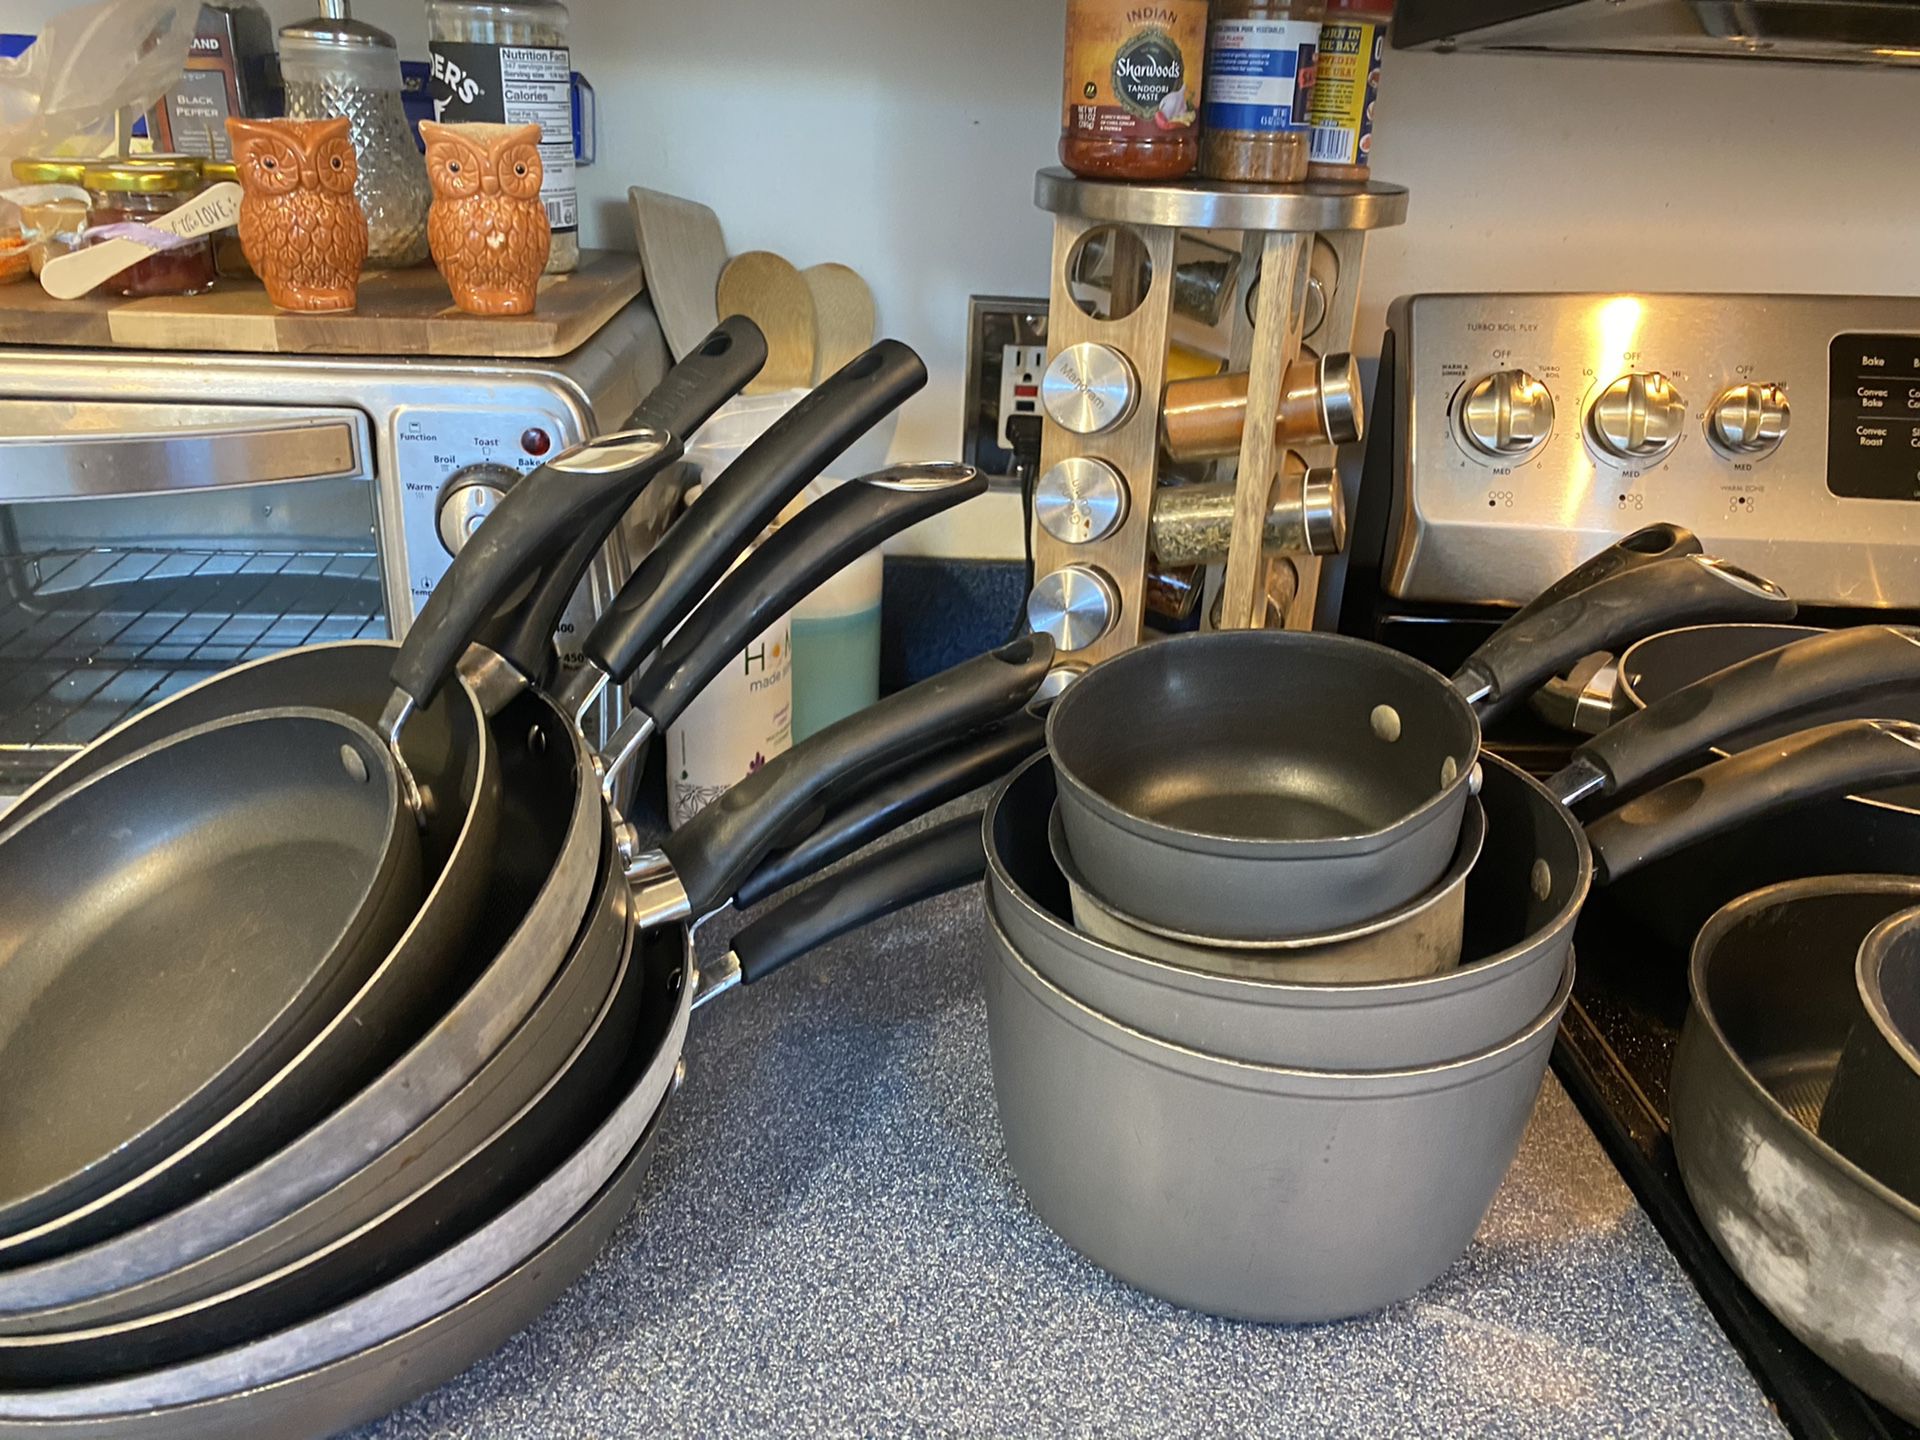 2 sets of kitchen cookware